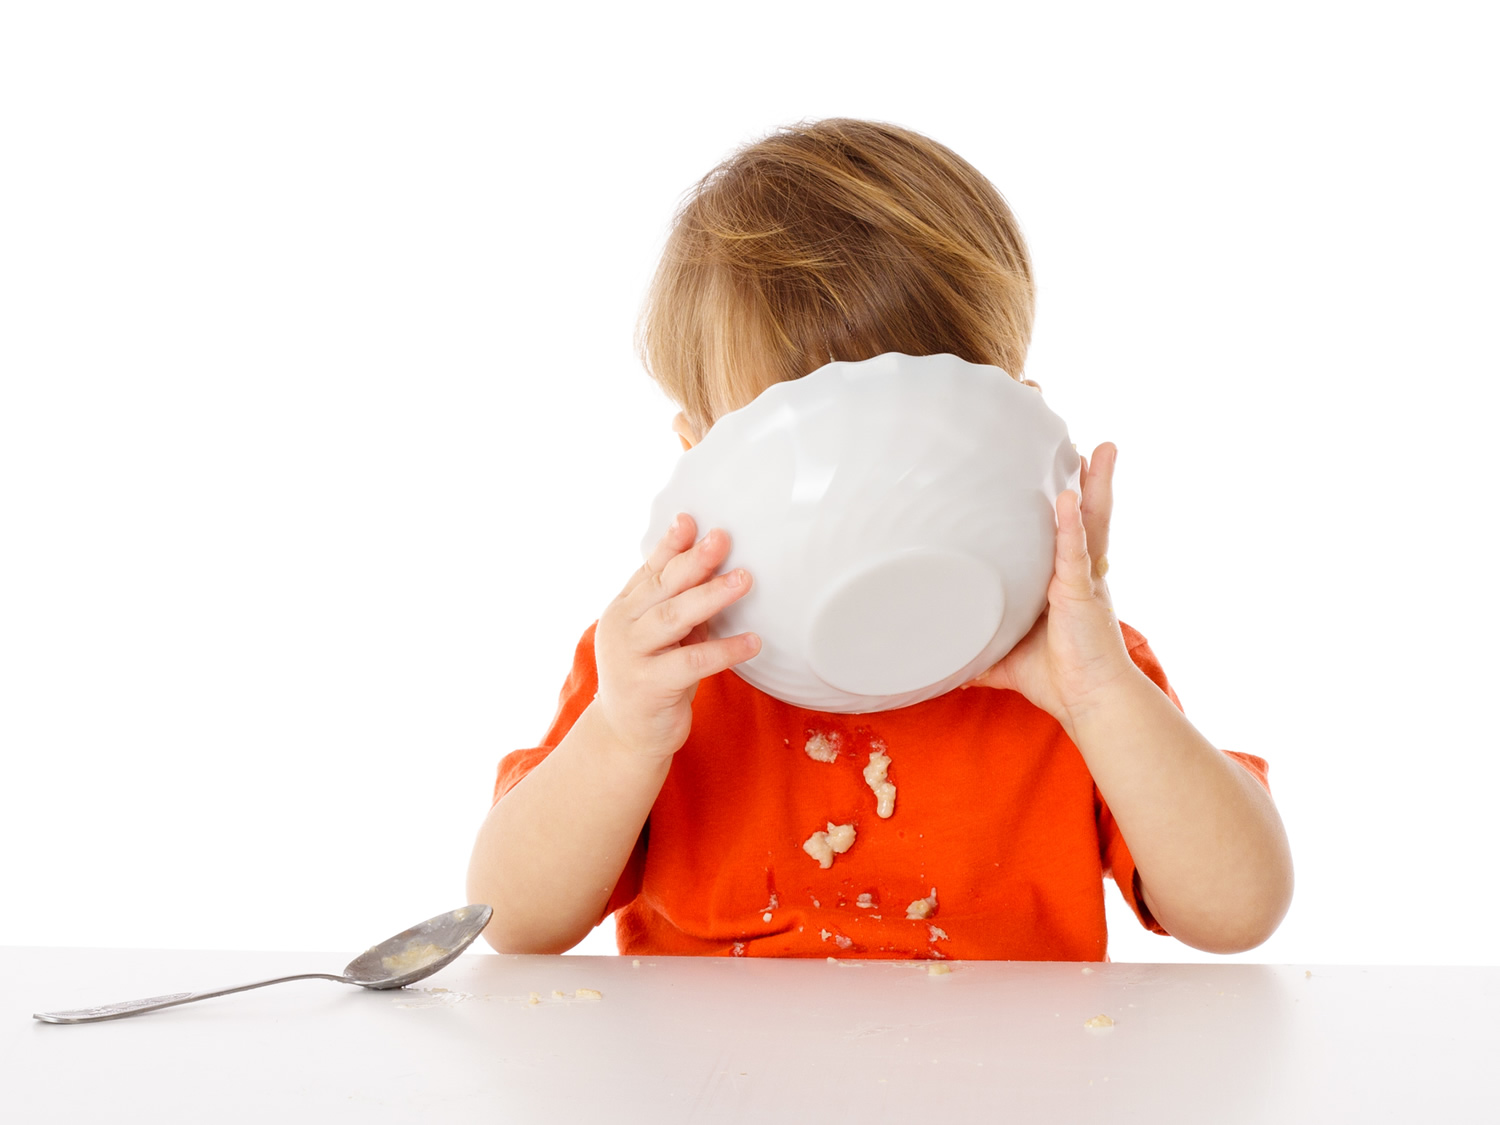 child eating dried cereal - image